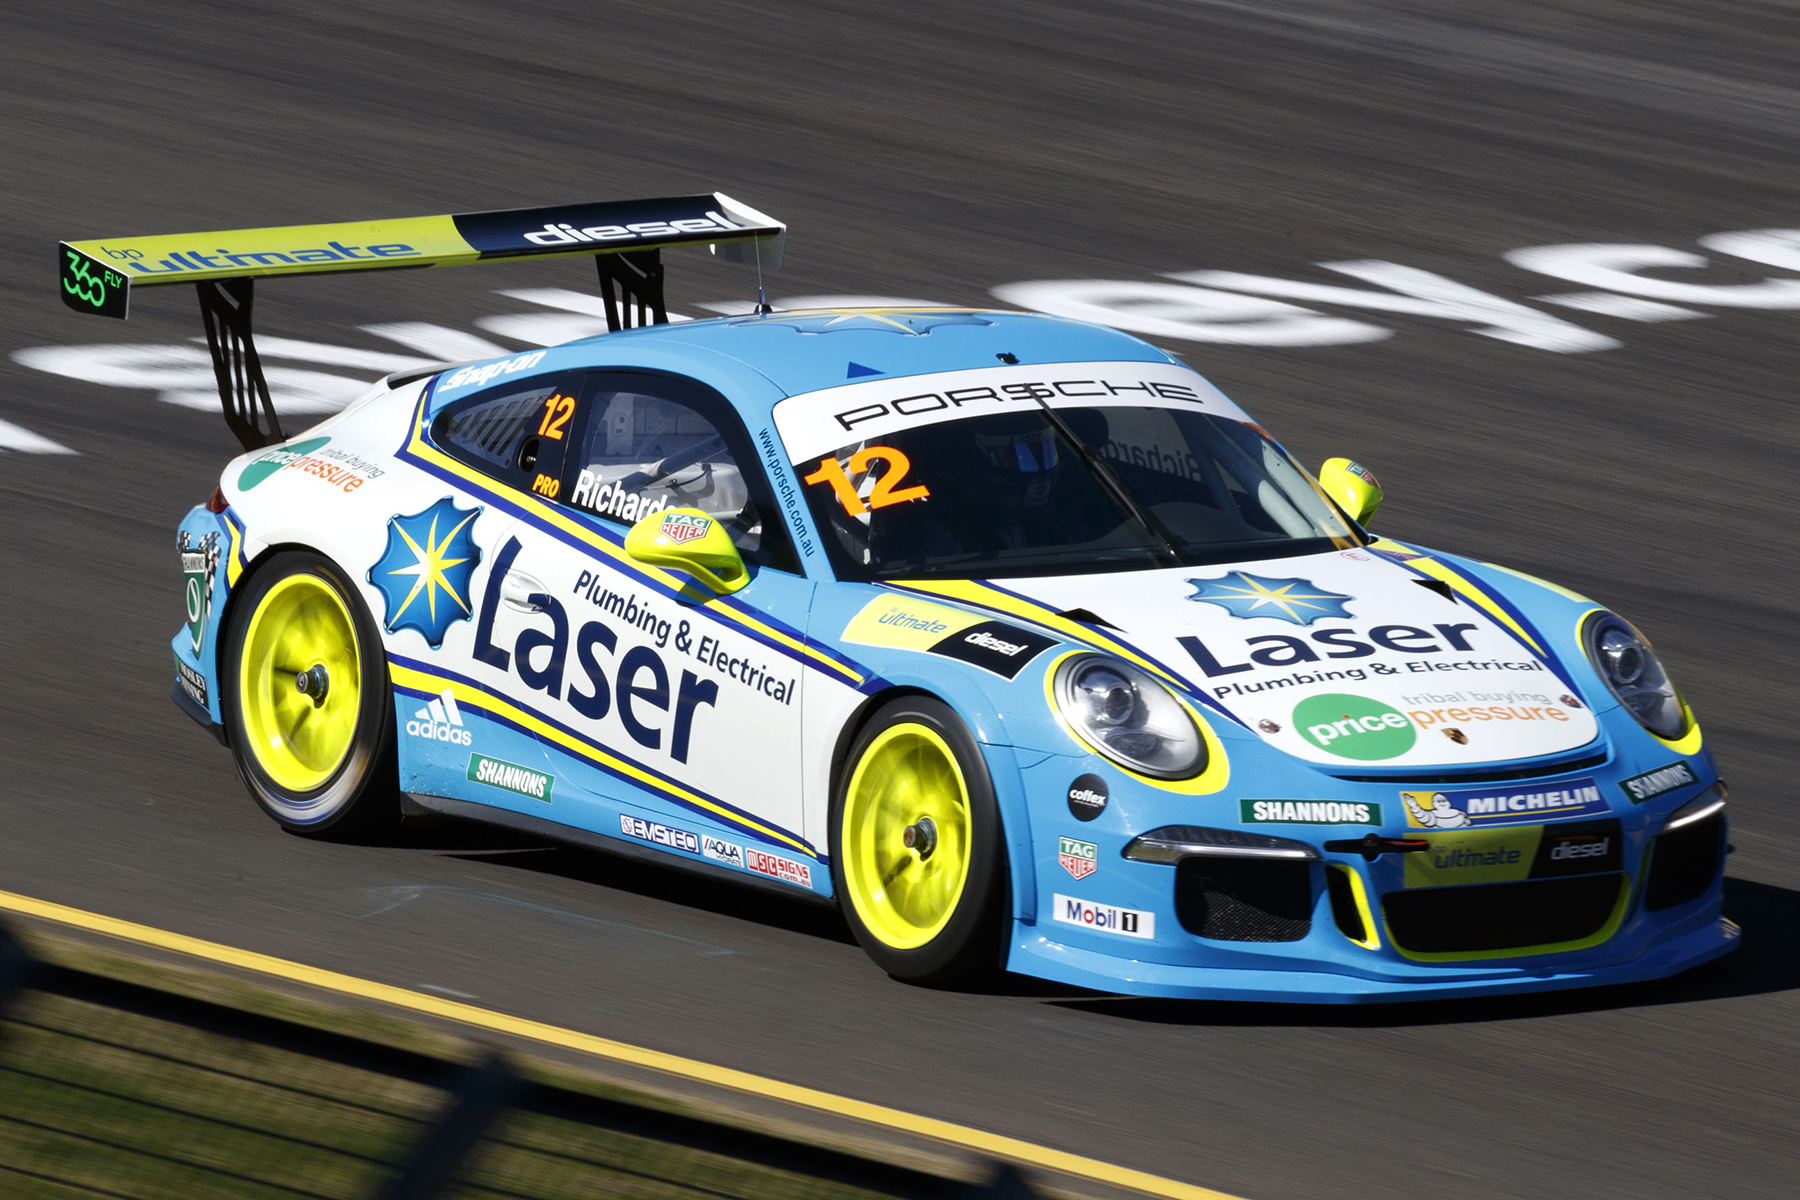 Captured at Round 4 of the Porsche Carrera Cup at the Sydney Super Sprint, Sydney Motorsport Park, Eastern Creek, New South Wales, Australia.